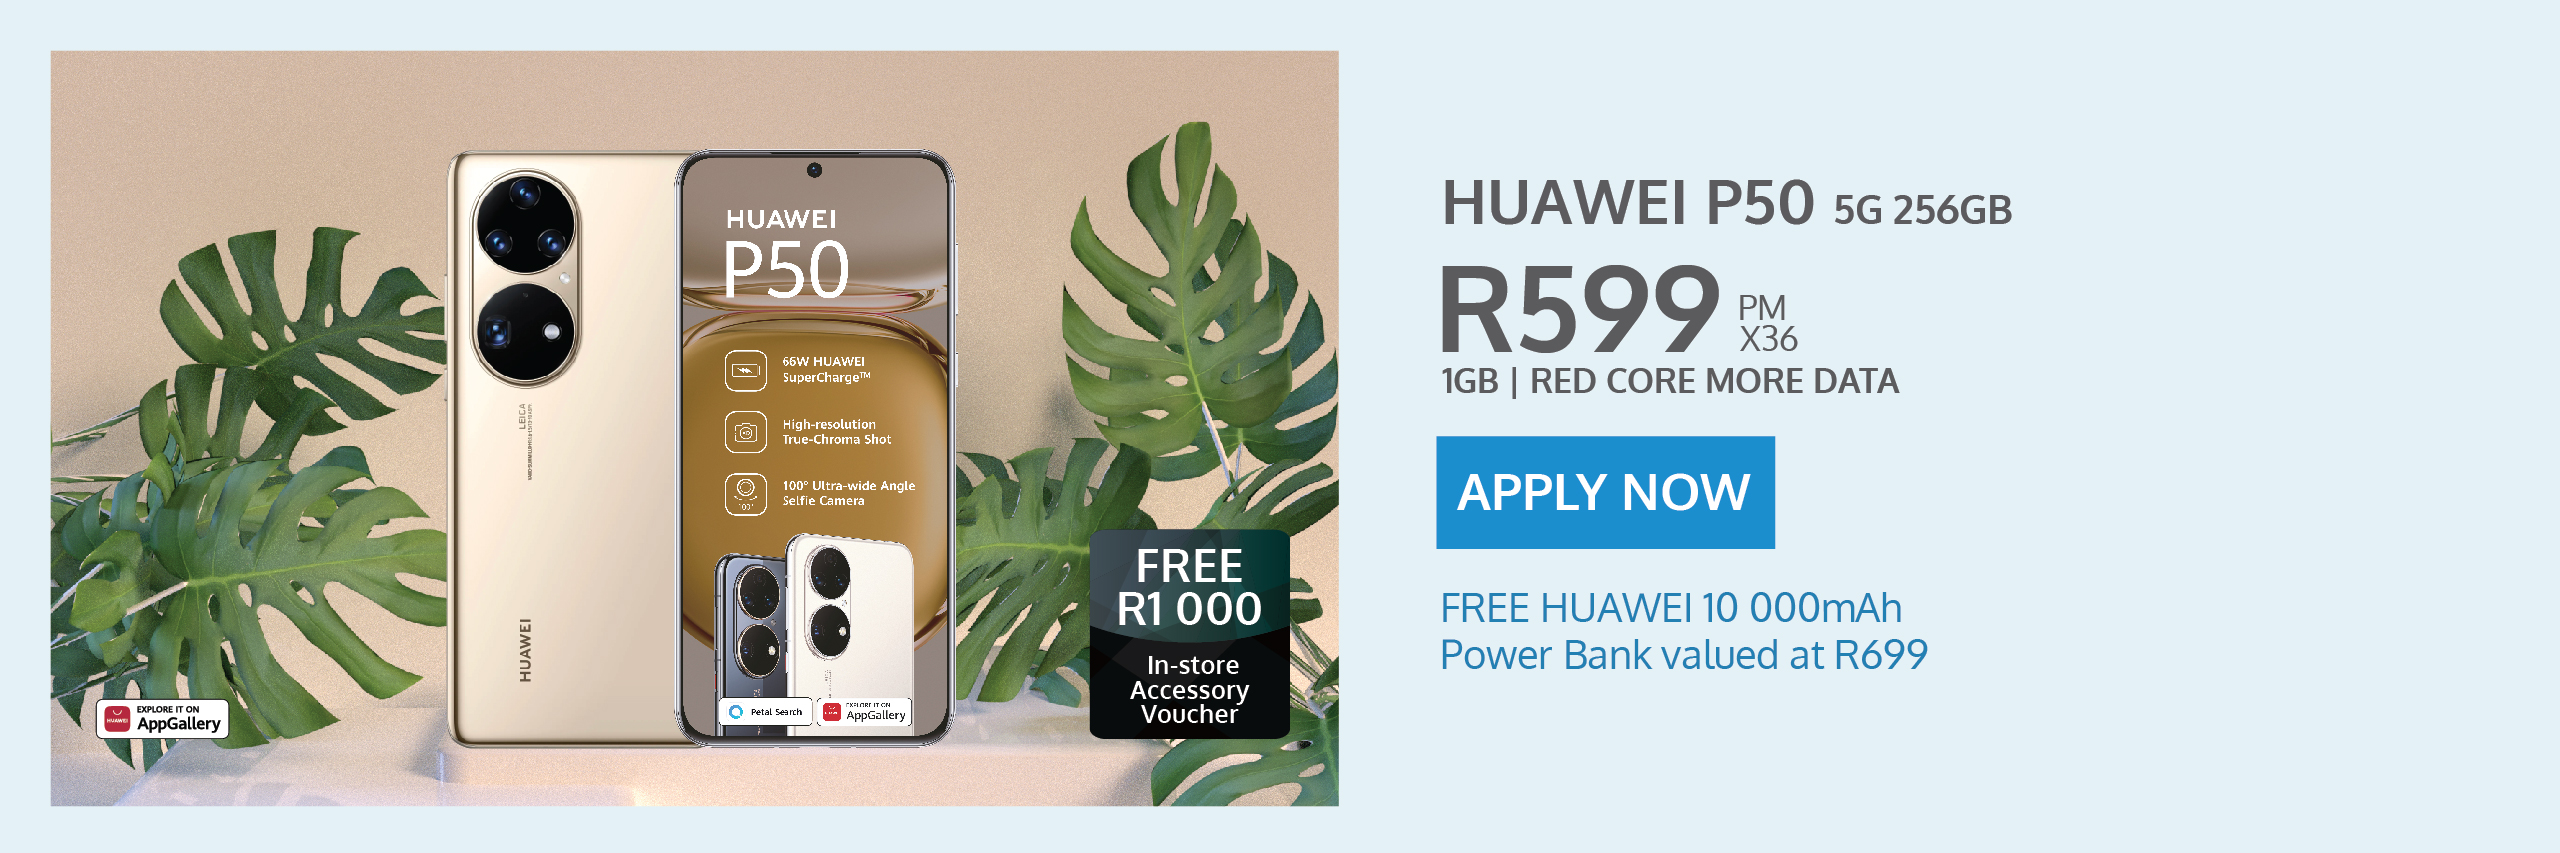 Huawei P50 5G contract deal